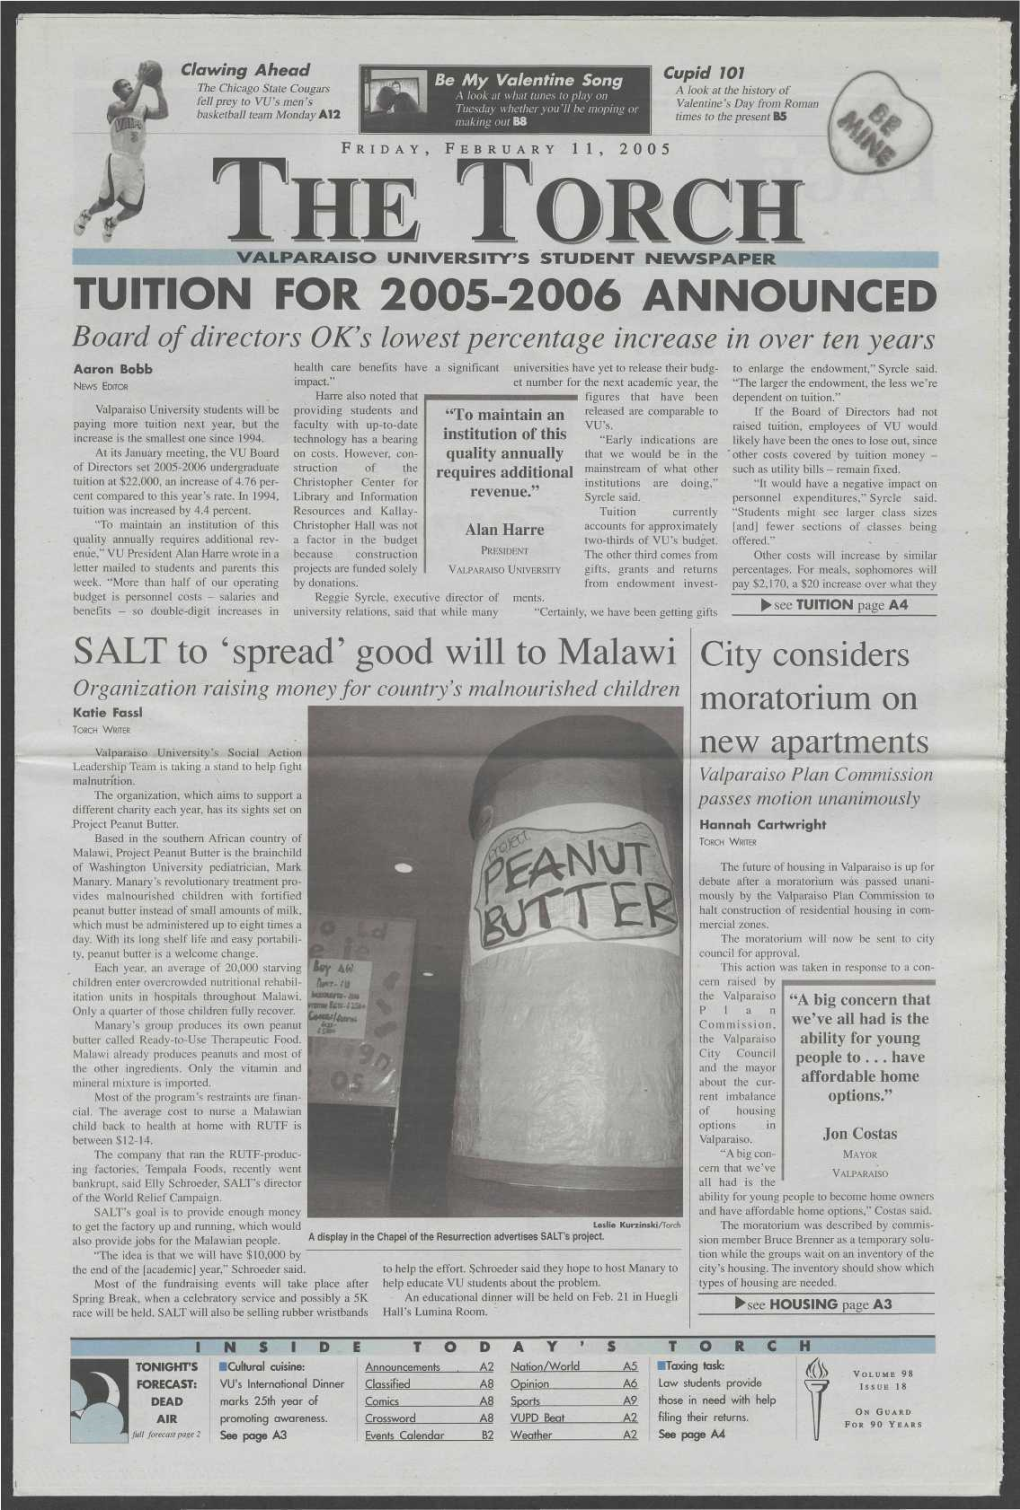 Tuition for 2005-2006 Announced